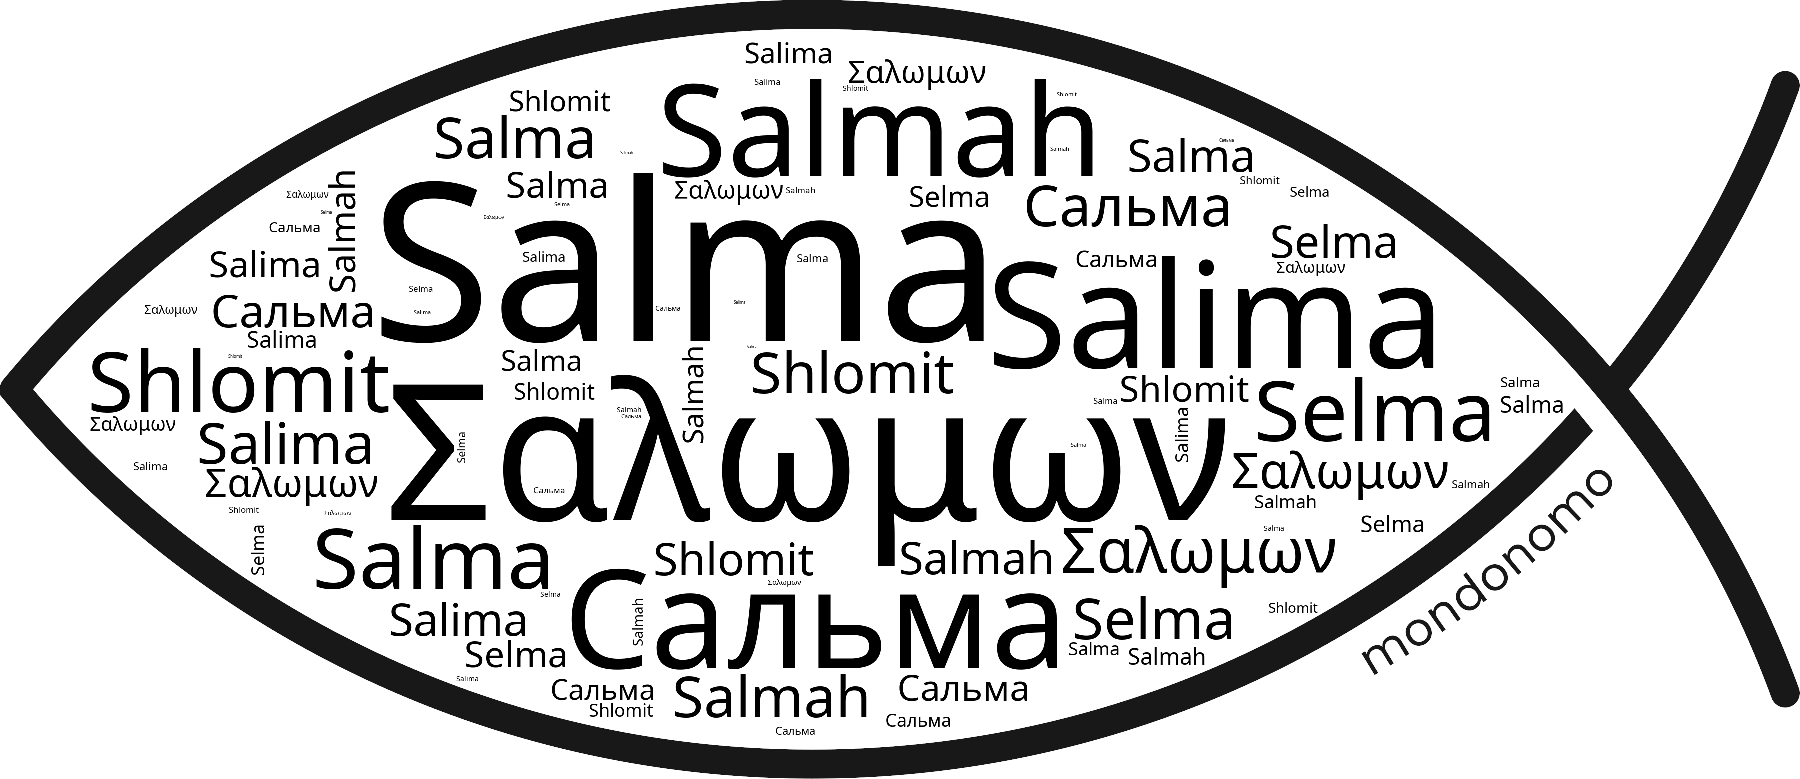 Name Salma in the world's Bibles